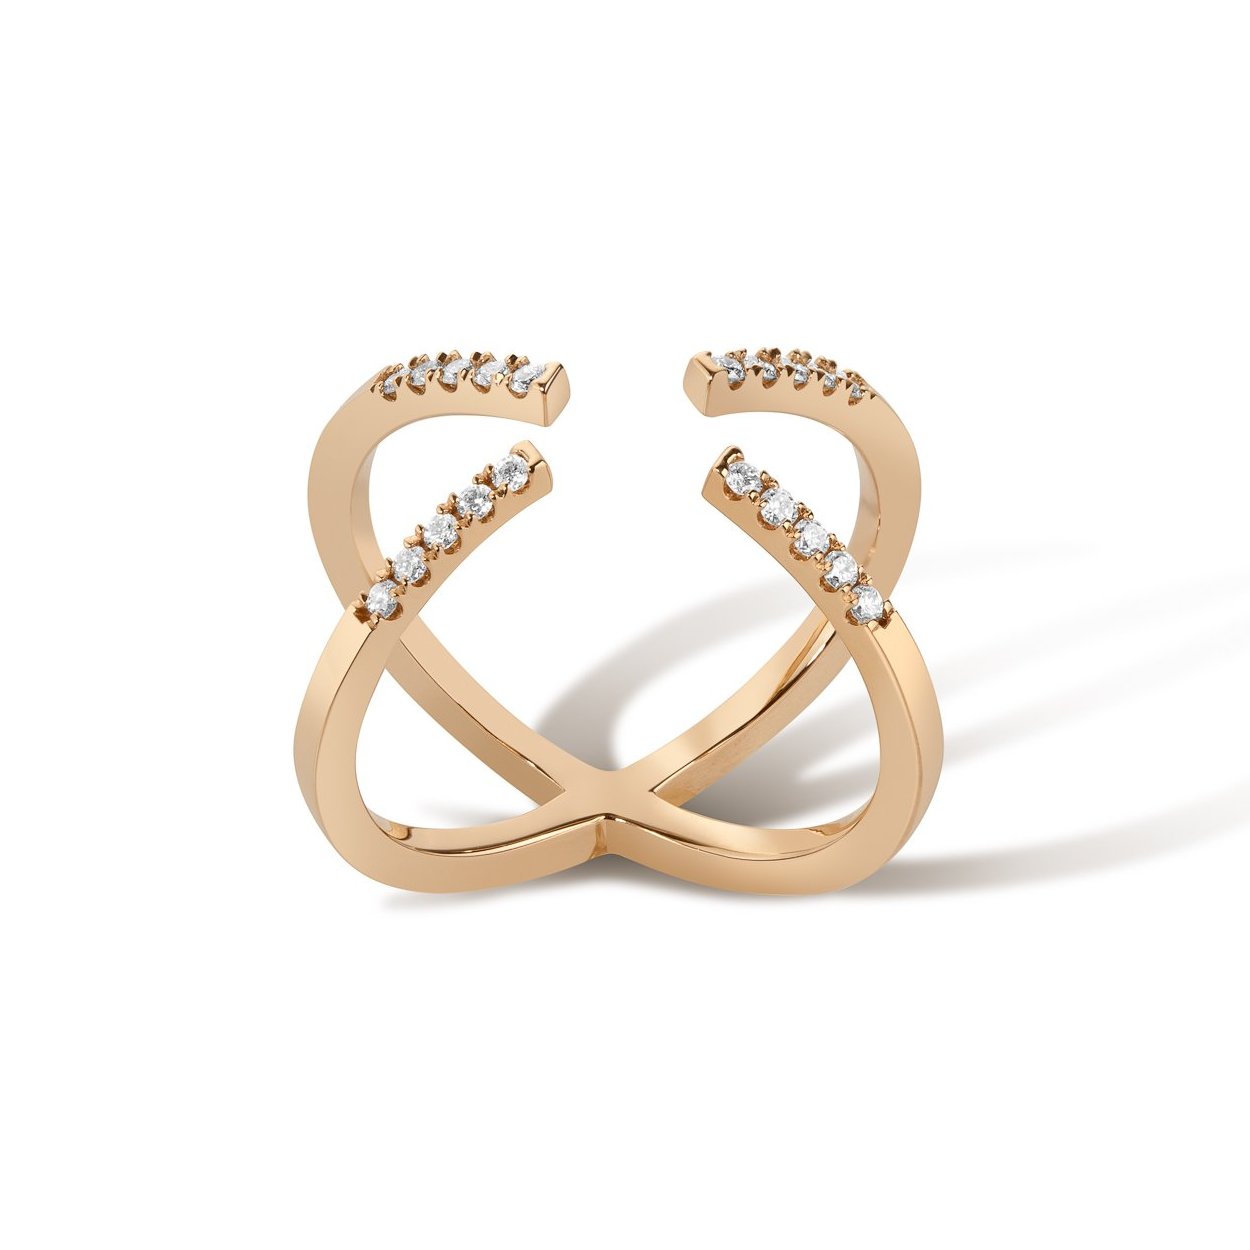 Shahla Karimi Jewelry Central Park X-Ring No. 3 in 14K Yellow Gold With White Diamonds